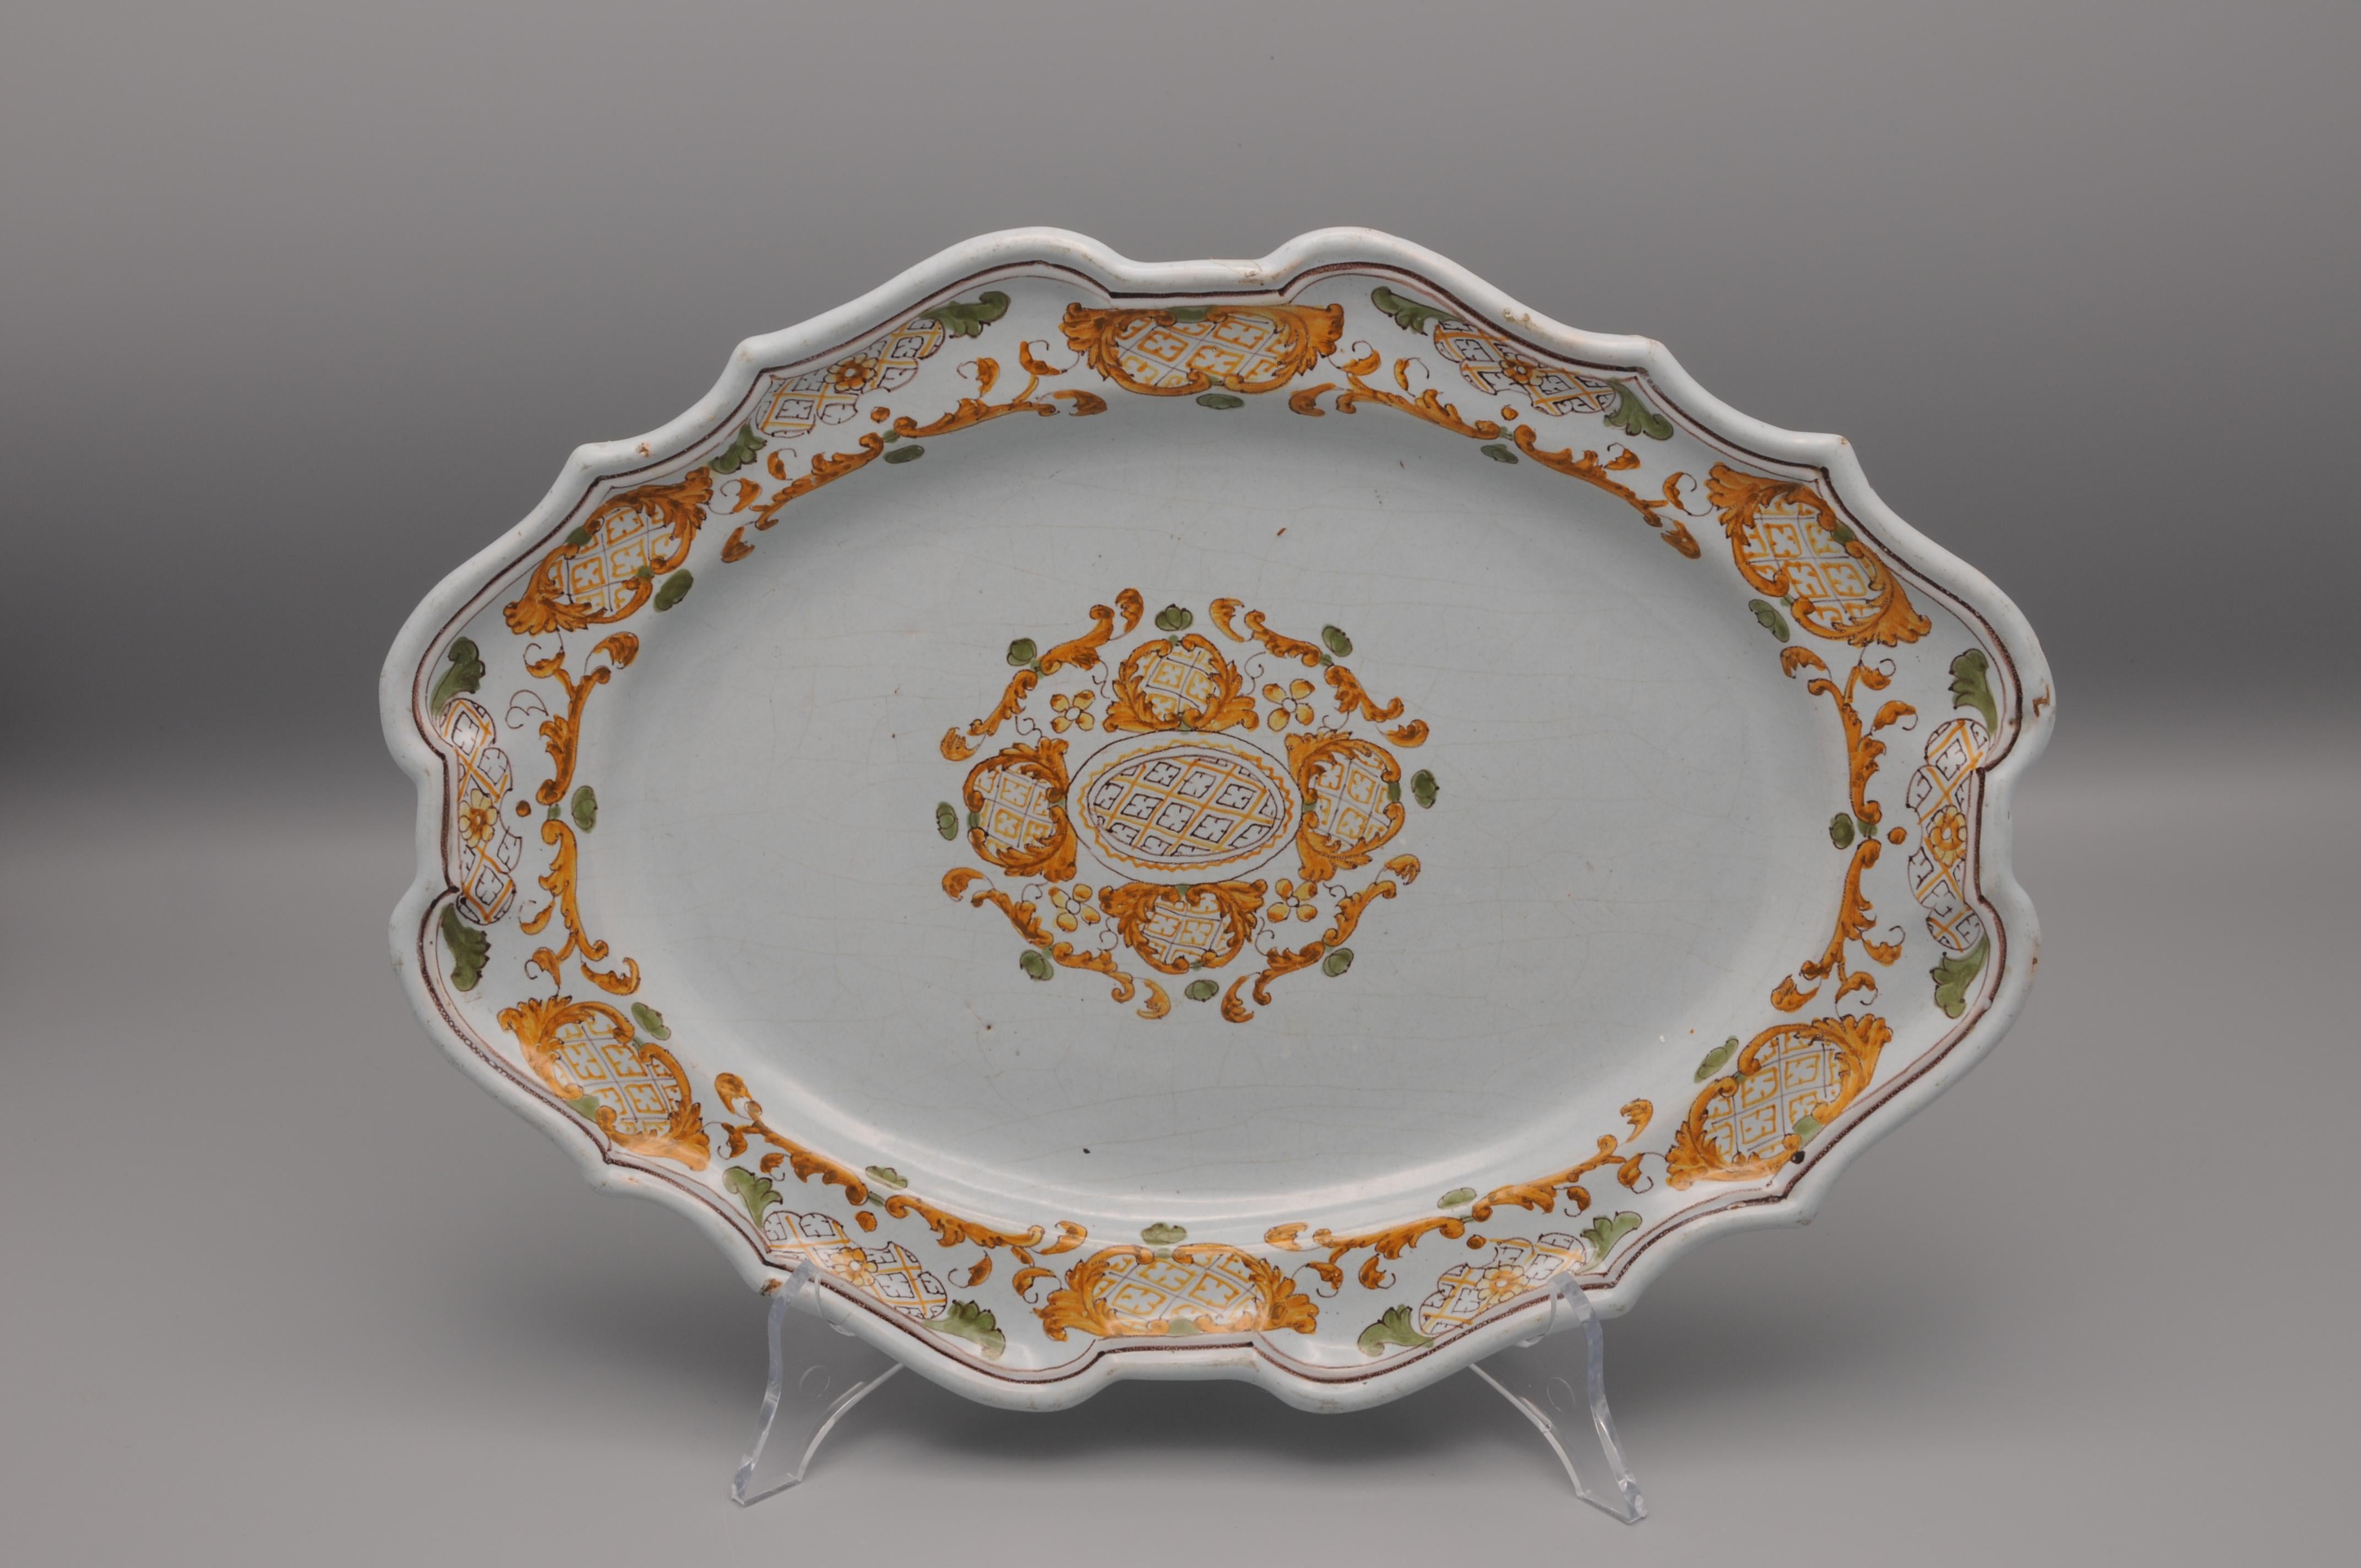 Manifattura San Carlo della Real Fabbrica di Caserta - Serving dish in Moustiers style with scalloped edge decorated in ocher and green monochrome with a medallion in the center of the basin and foliage and medallions on the wing.

unmarked
Italy, 